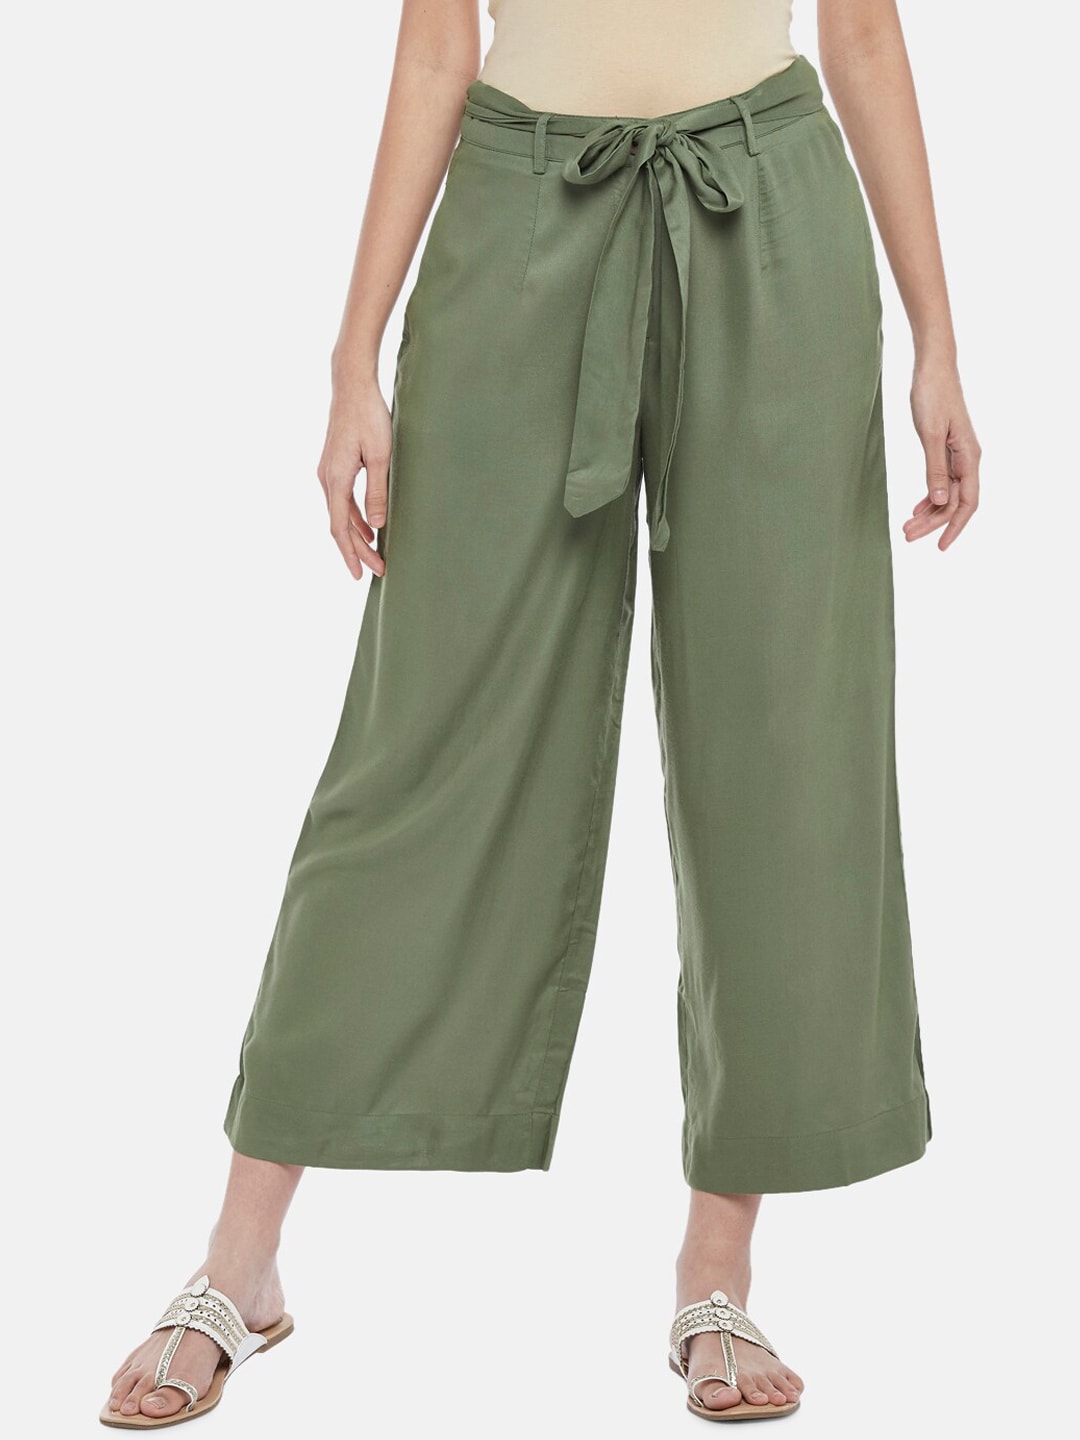 AKKRITI BY PANTALOONS Women Olive Green Trousers Price in India